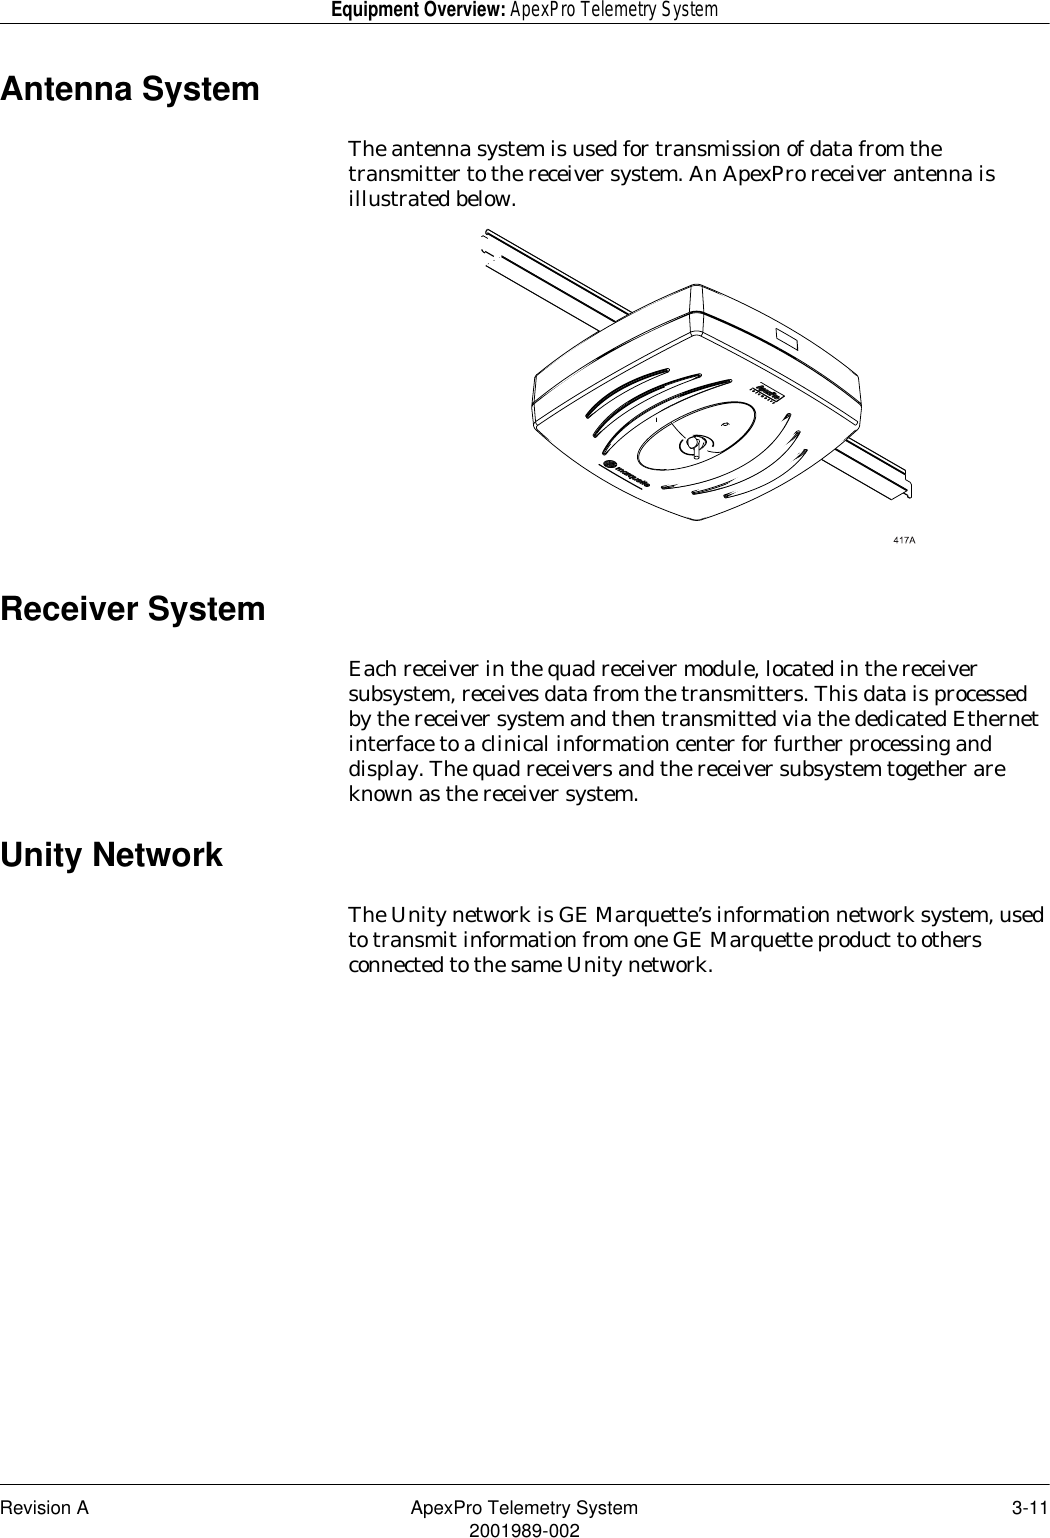 Revision A ApexPro Telemetry System 3-112001989-002Equipment Overview: ApexPro Telemetry SystemAntenna SystemThe antenna system is used for transmission of data from the transmitter to the receiver system. An ApexPro receiver antenna is illustrated below.Receiver SystemEach receiver in the quad receiver module, located in the receiver subsystem, receives data from the transmitters. This data is processed by the receiver system and then transmitted via the dedicated Ethernet interface to a clinical information center for further processing and display. The quad receivers and the receiver subsystem together are known as the receiver system.Unity NetworkThe Unity network is GE Marquette’s information network system, used to transmit information from one GE Marquette product to others connected to the same Unity network.